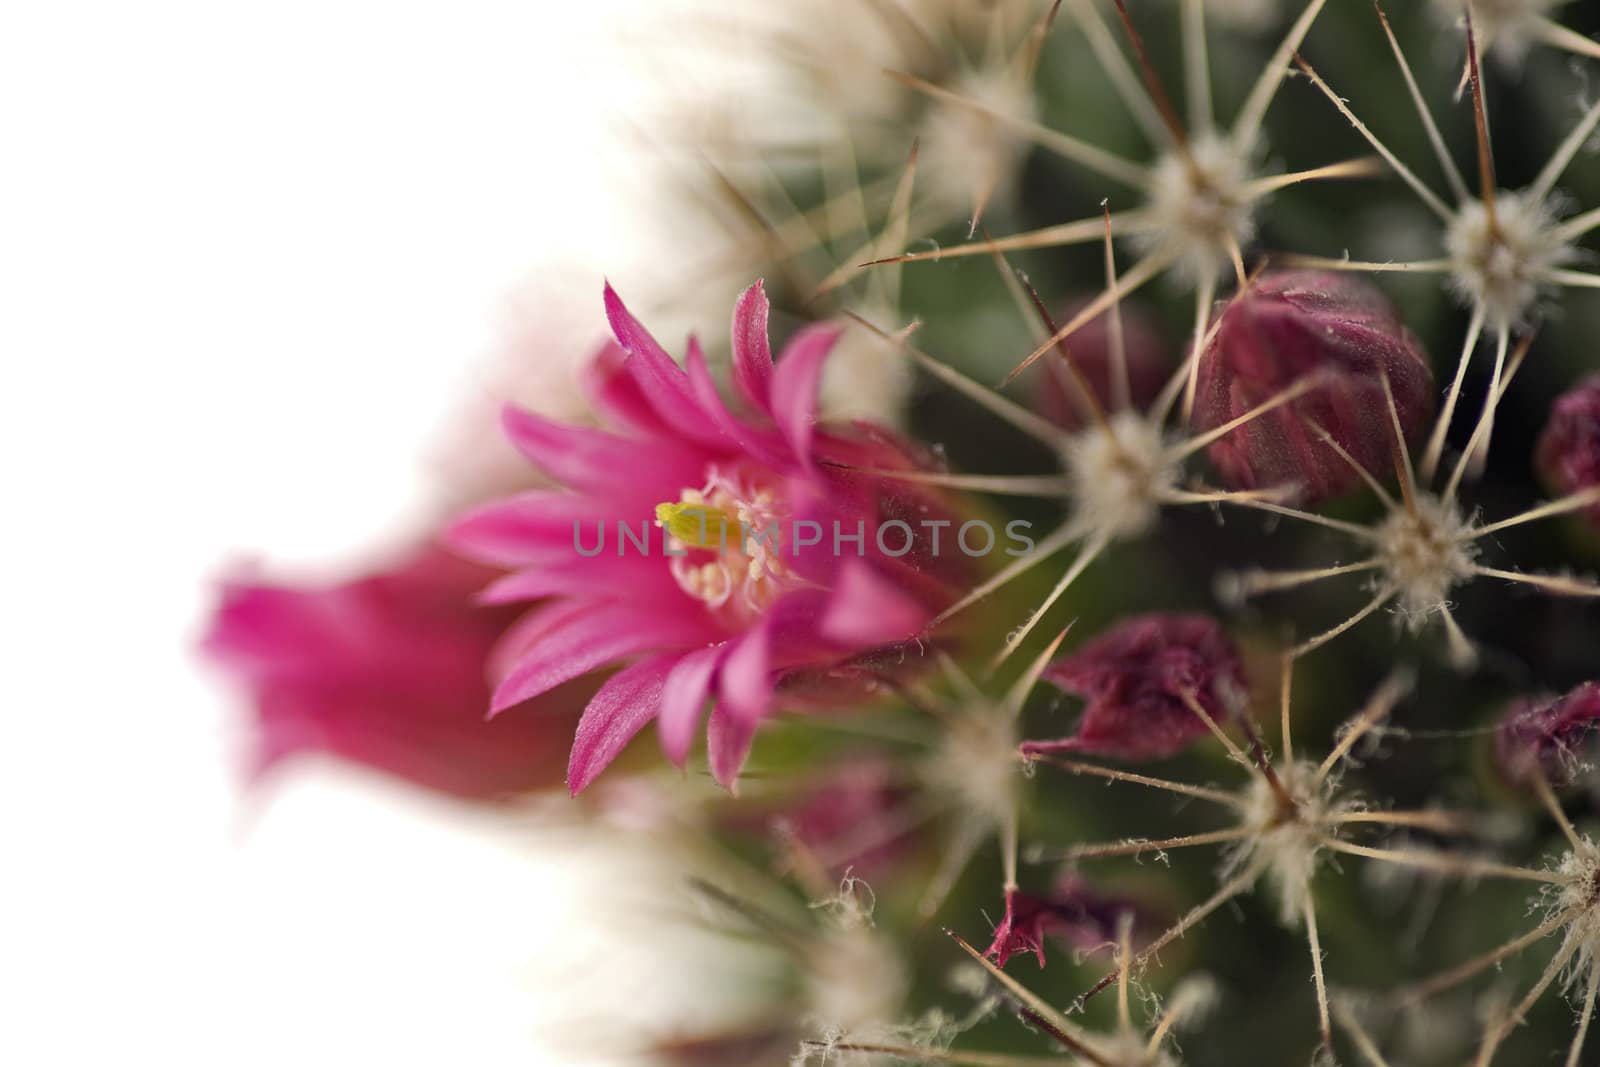 Blossoming cactus with pink flowers close up